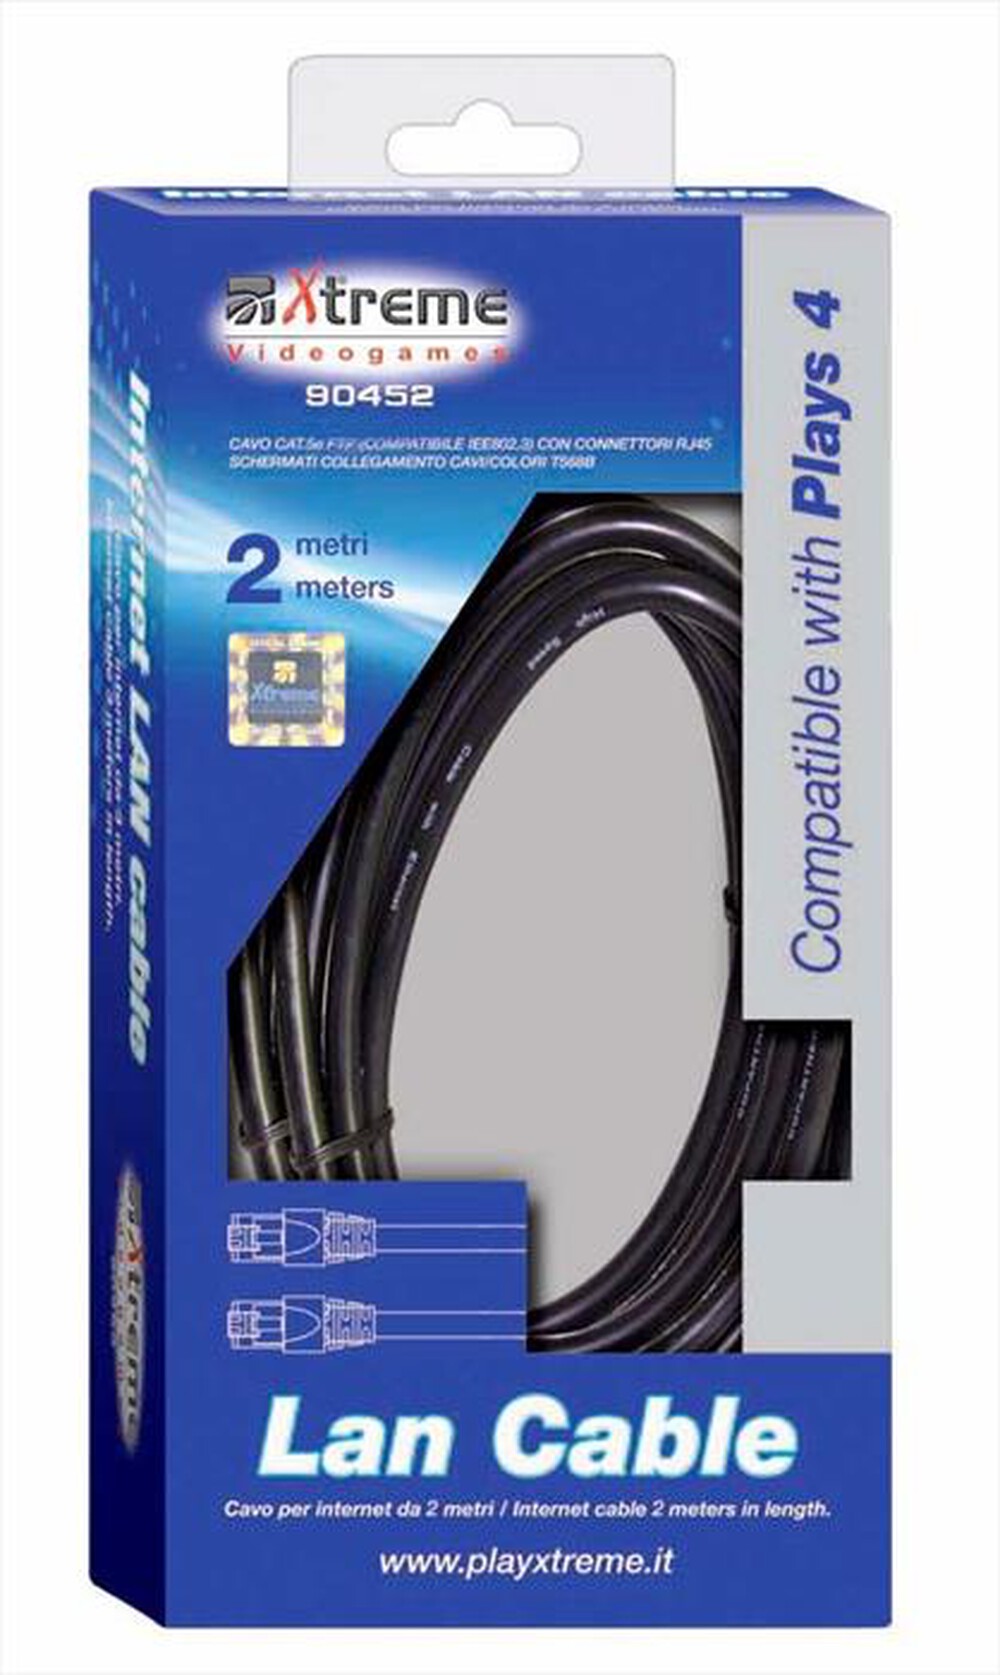 "XTREME - 90452 - PS4 Lan Cable"